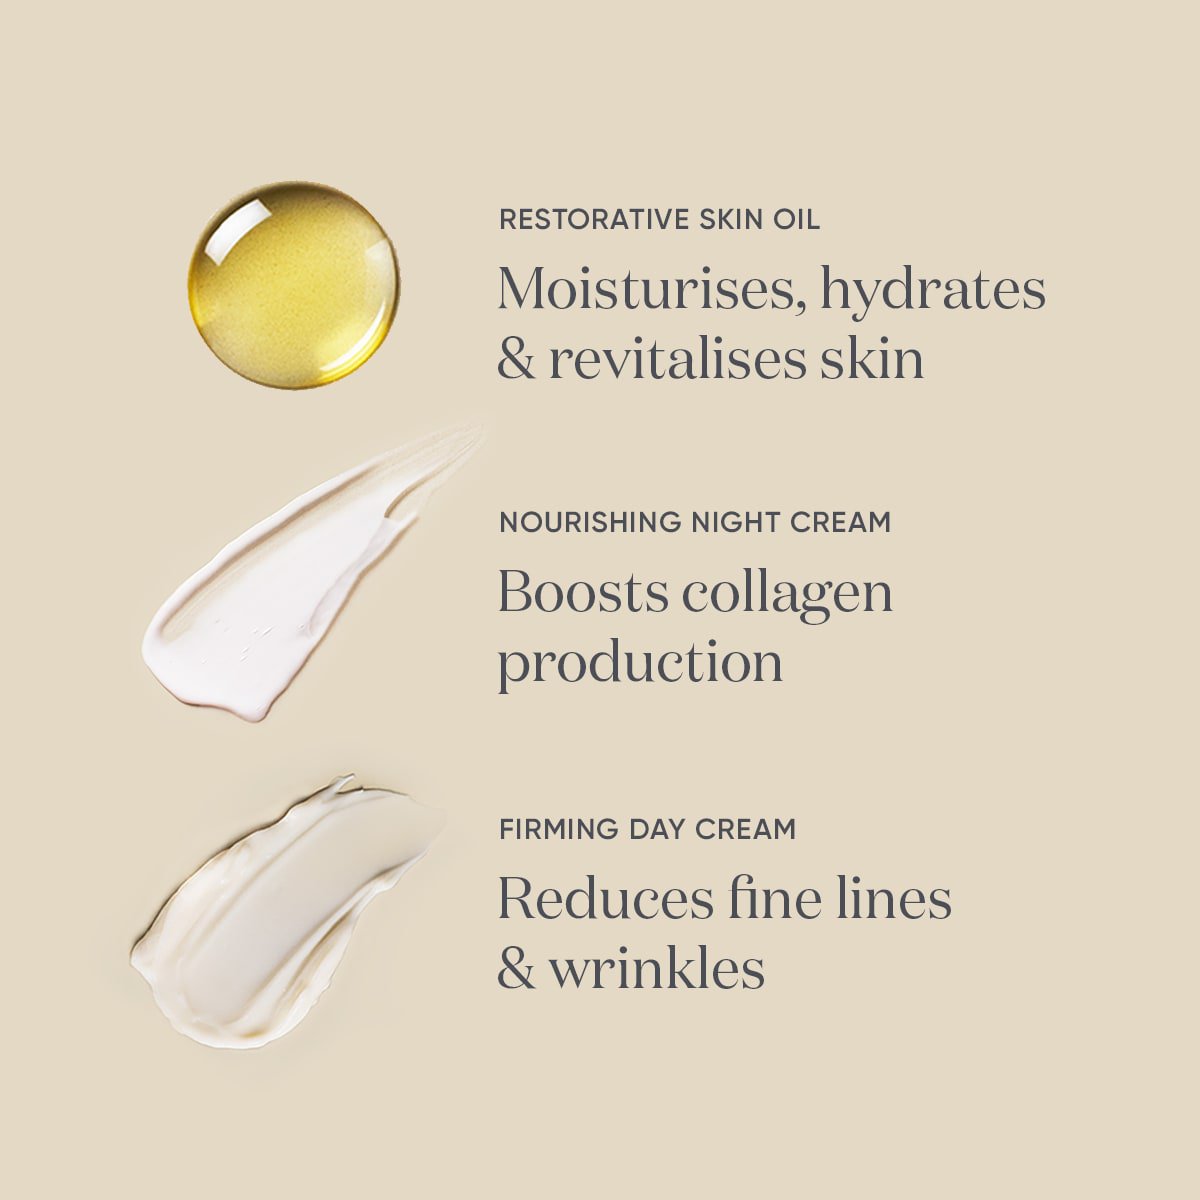 Image displaying the textures of the Restorative Trio products